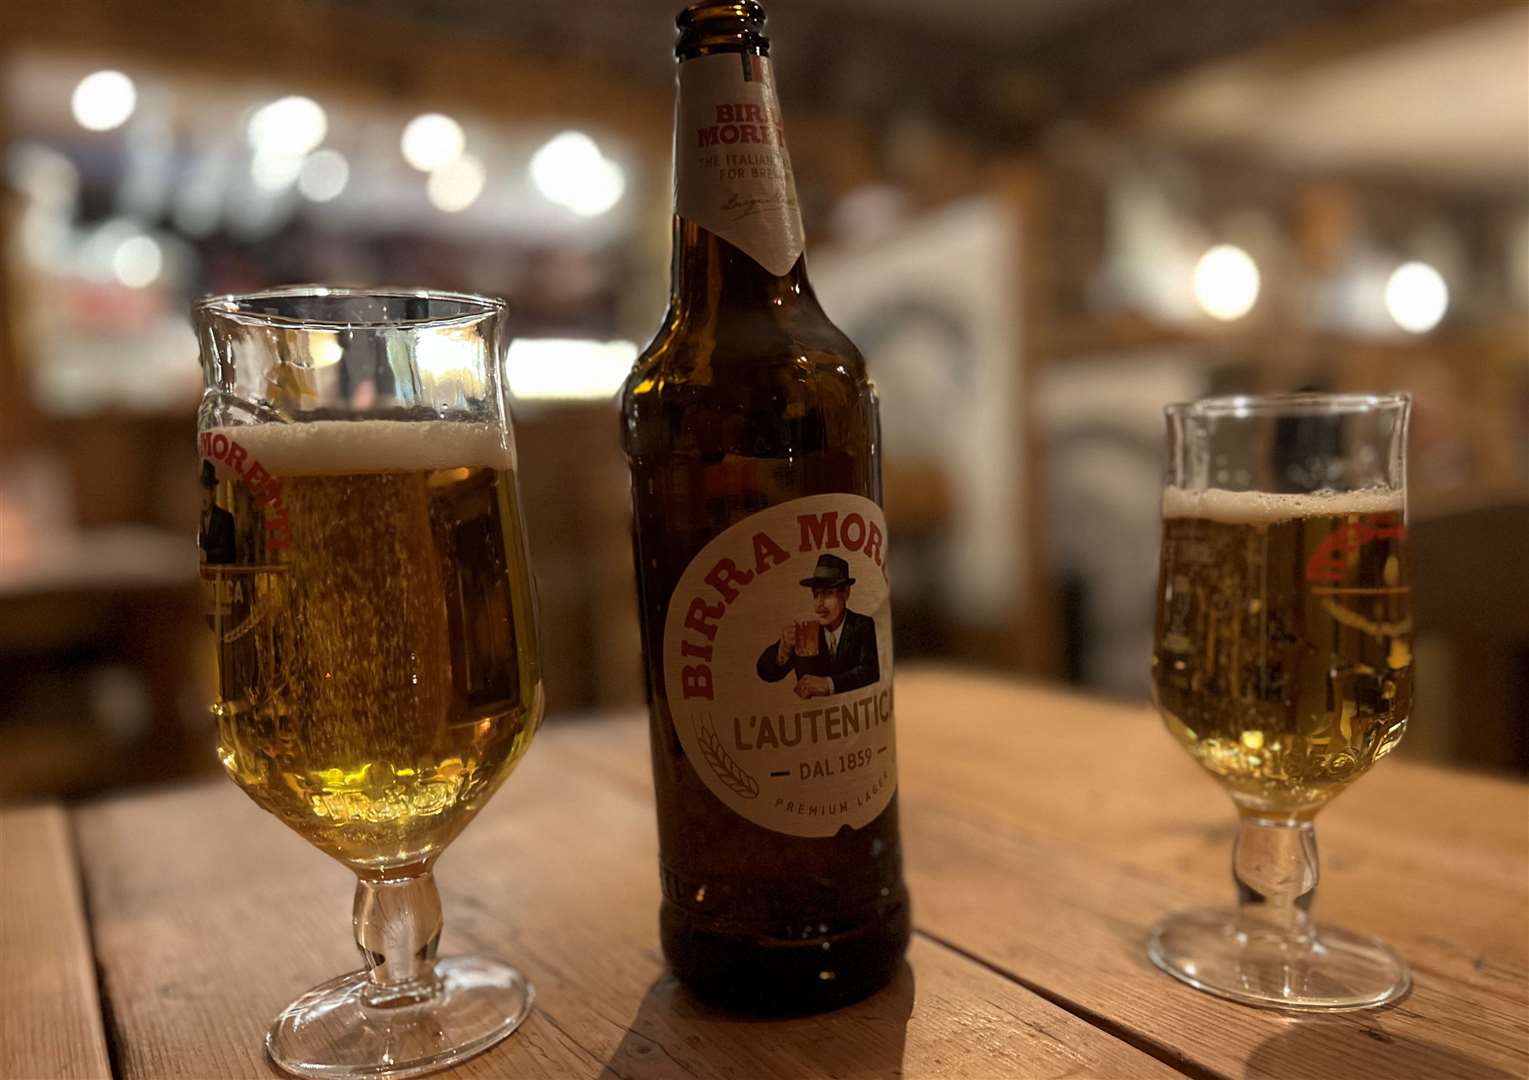 Call me tight - but one big bottle of Moretti, shared, saw us through the meal